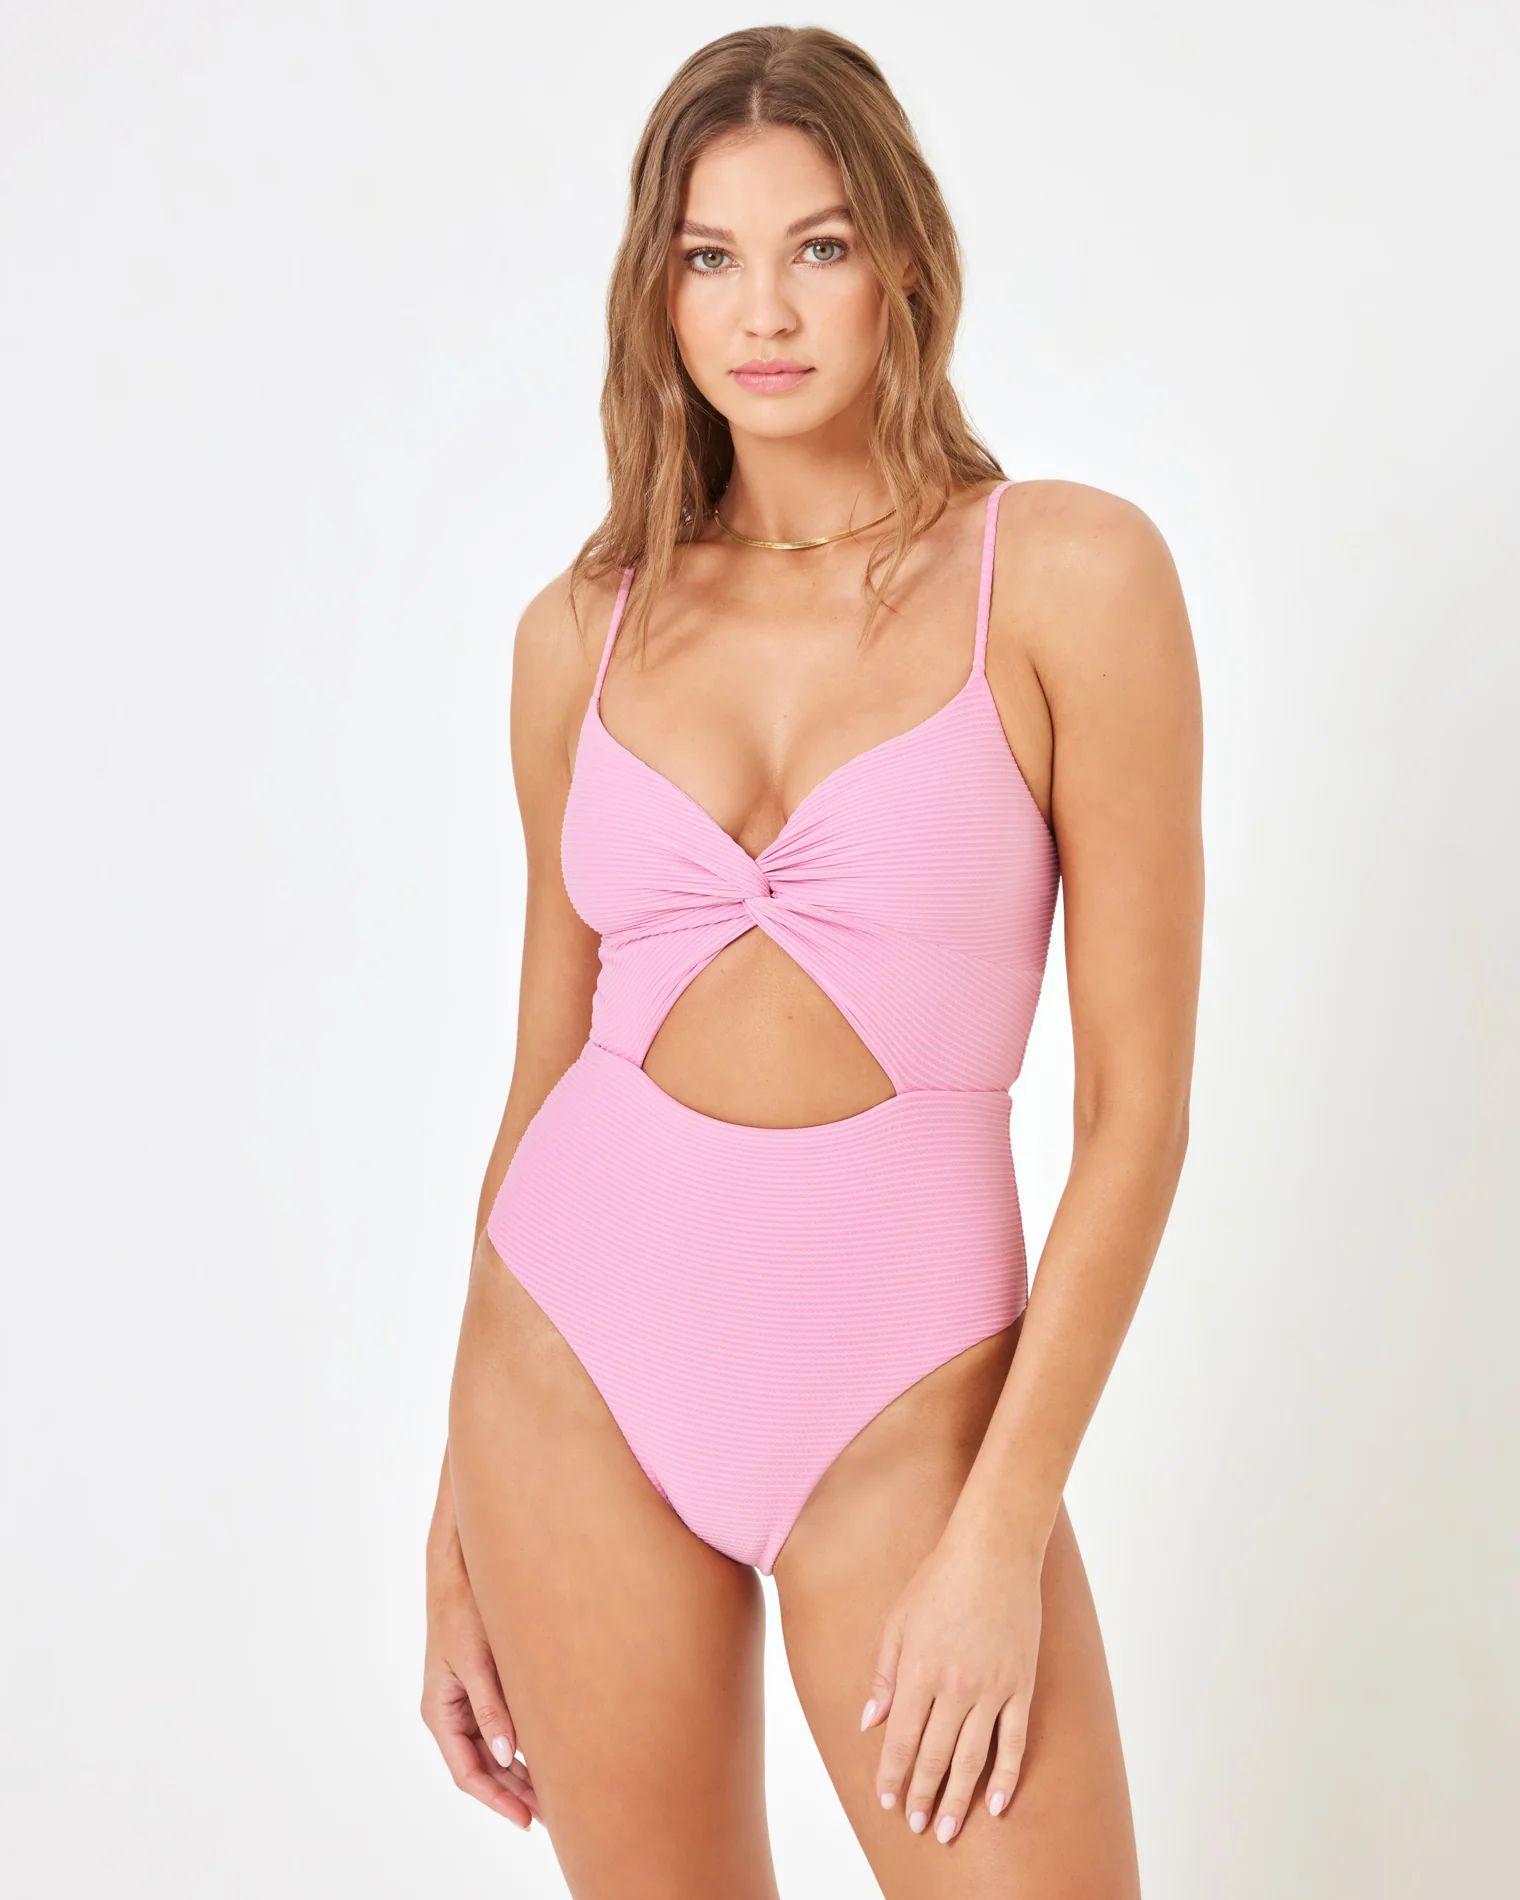 lspace x anthropologie kyslee one piece swimsuit | L*Space